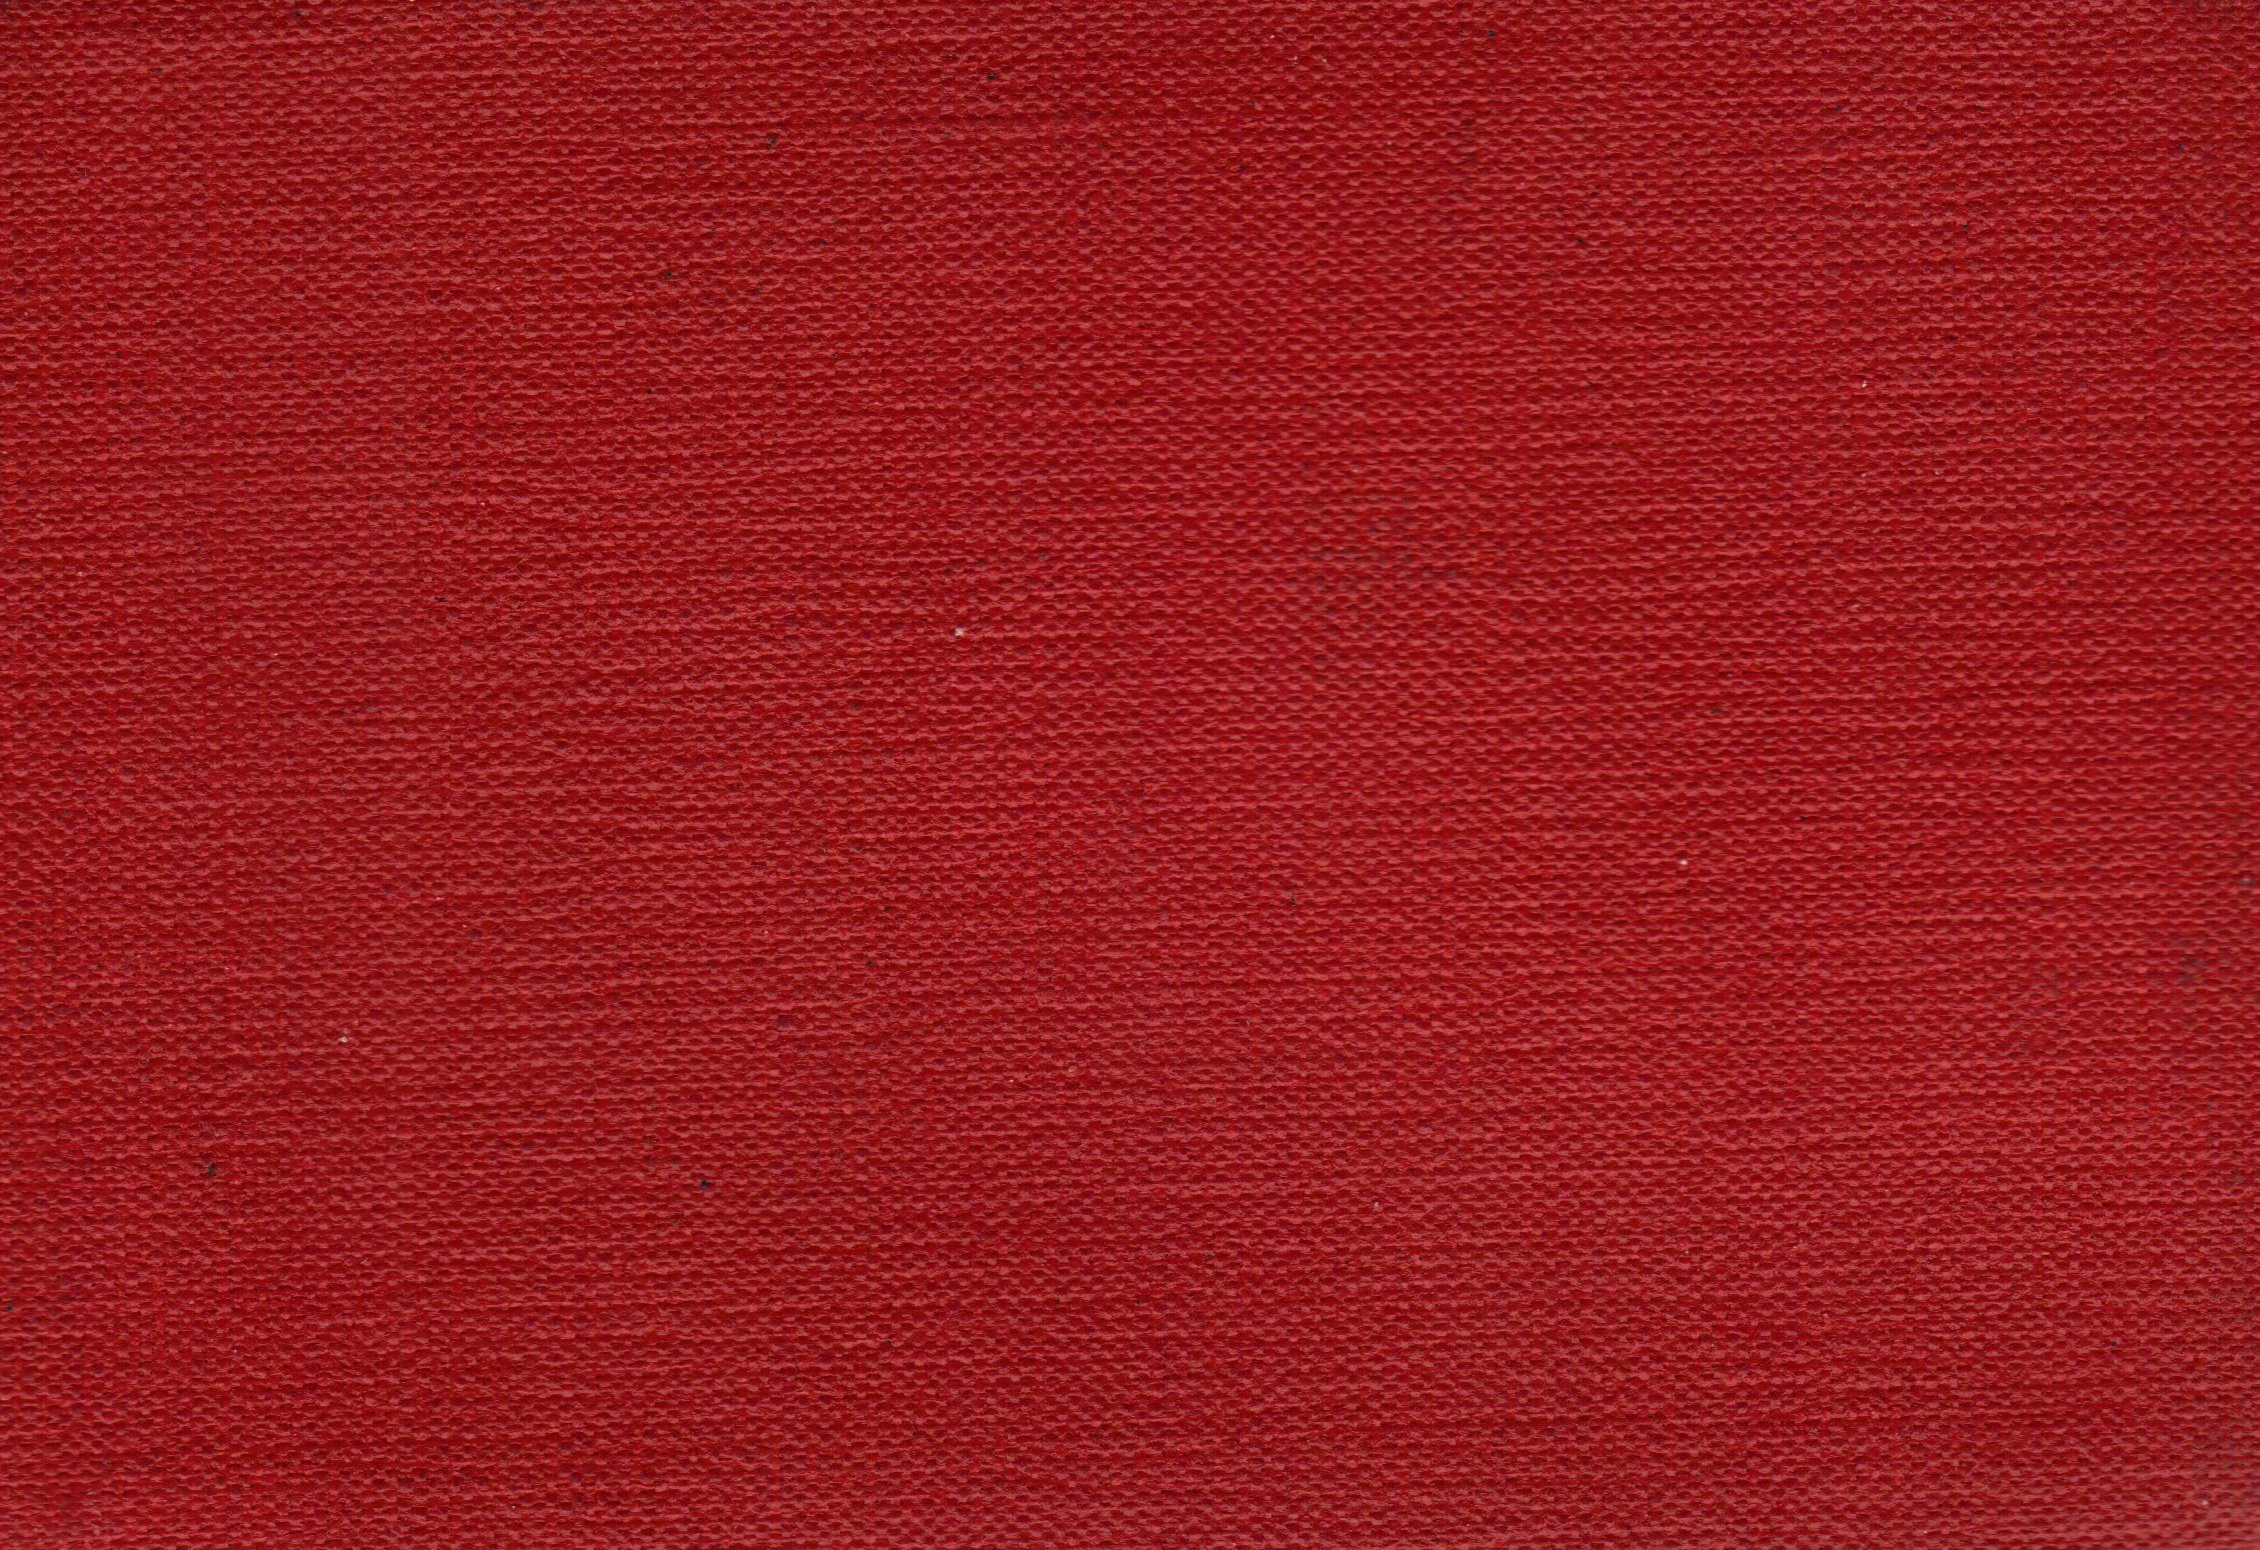 Painted Red Fabric Texture (JPG) | OnlyGFX.com